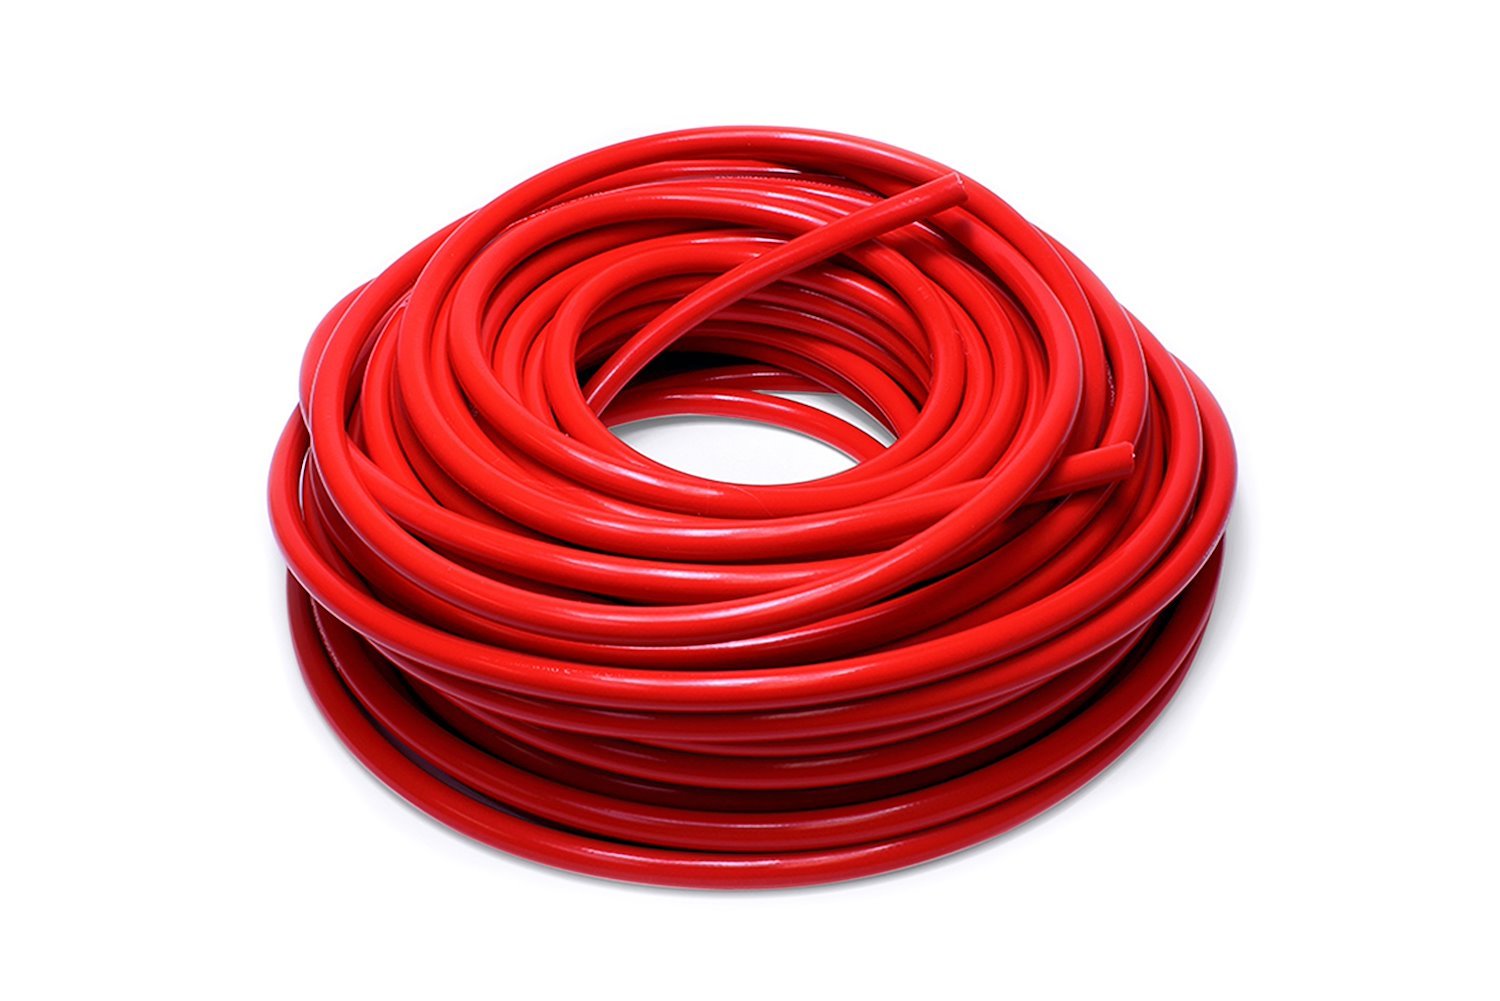 HTHH-016-REDx50 Silicone Heater Hose Tubing, High-Temp Reinforced, 5/32 in. ID, 50 ft. Roll, Red